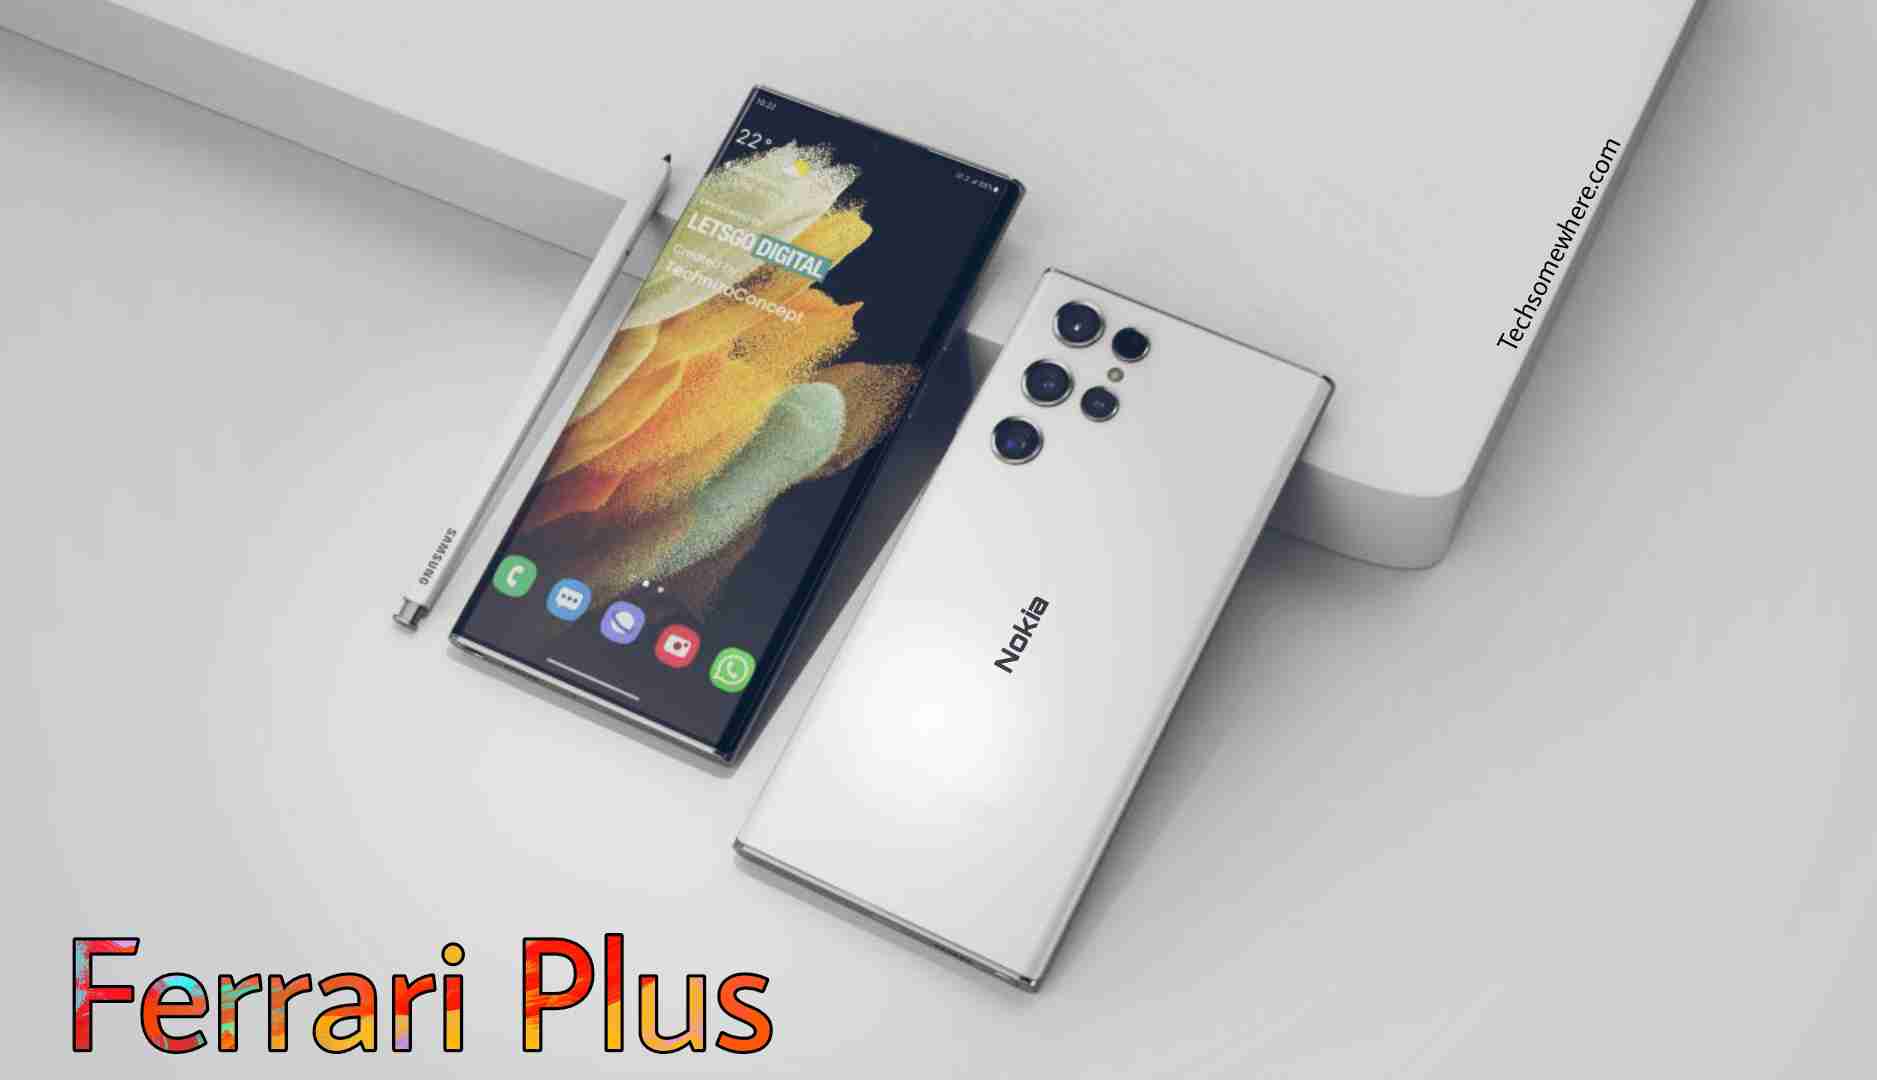 Nokia Ferrari Plus (2022) Price, Full Specifications with Release Date News & Review.